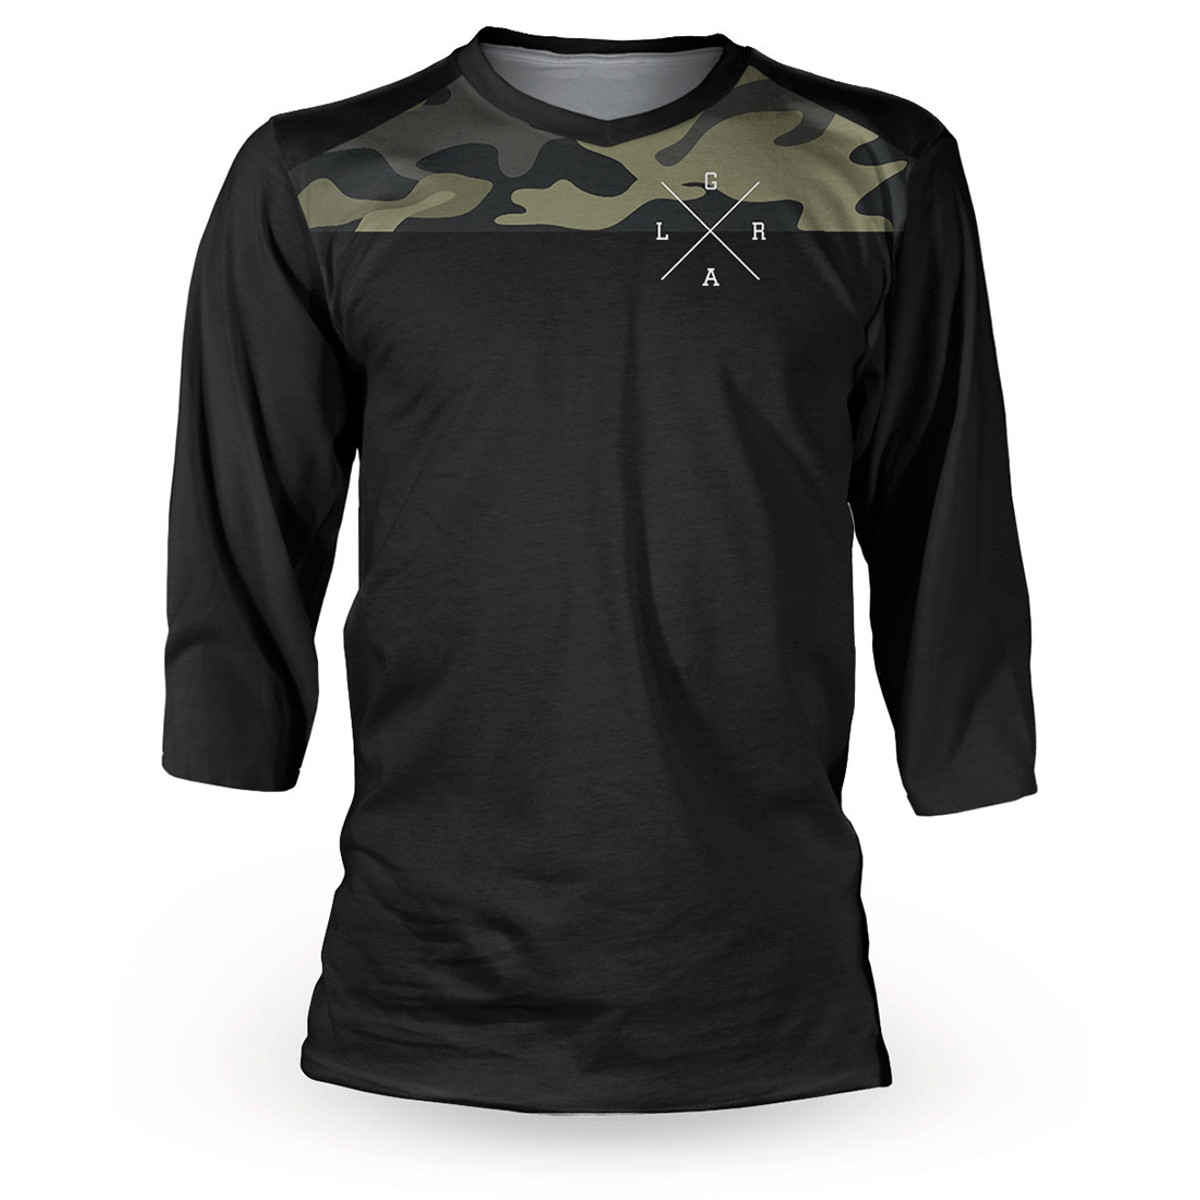 Loose Riders Maillot VTT Manches 3/4 Gravity Series Stealth - Black/Camo